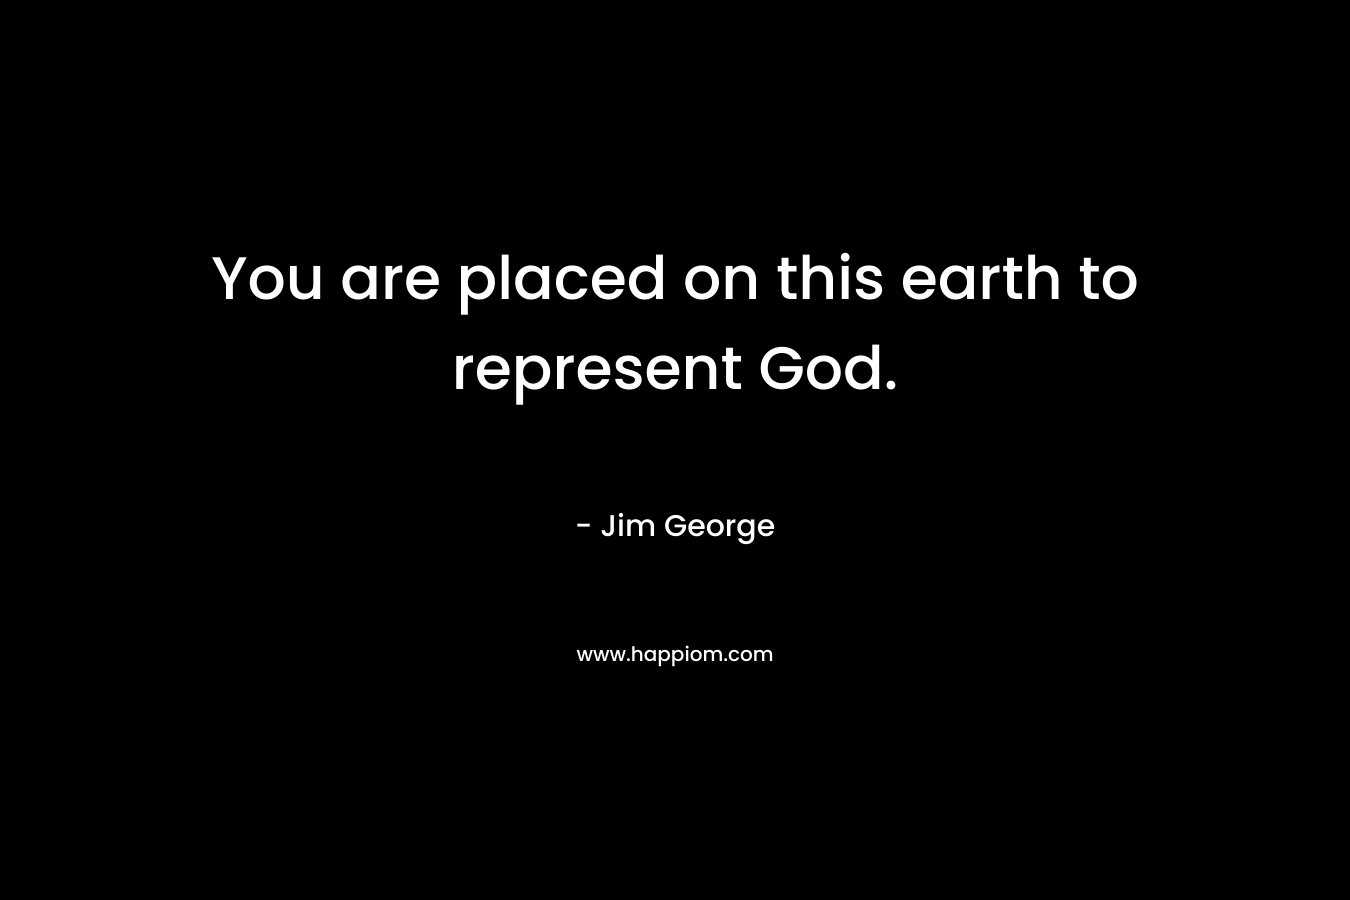 You are placed on this earth to represent God. – Jim George